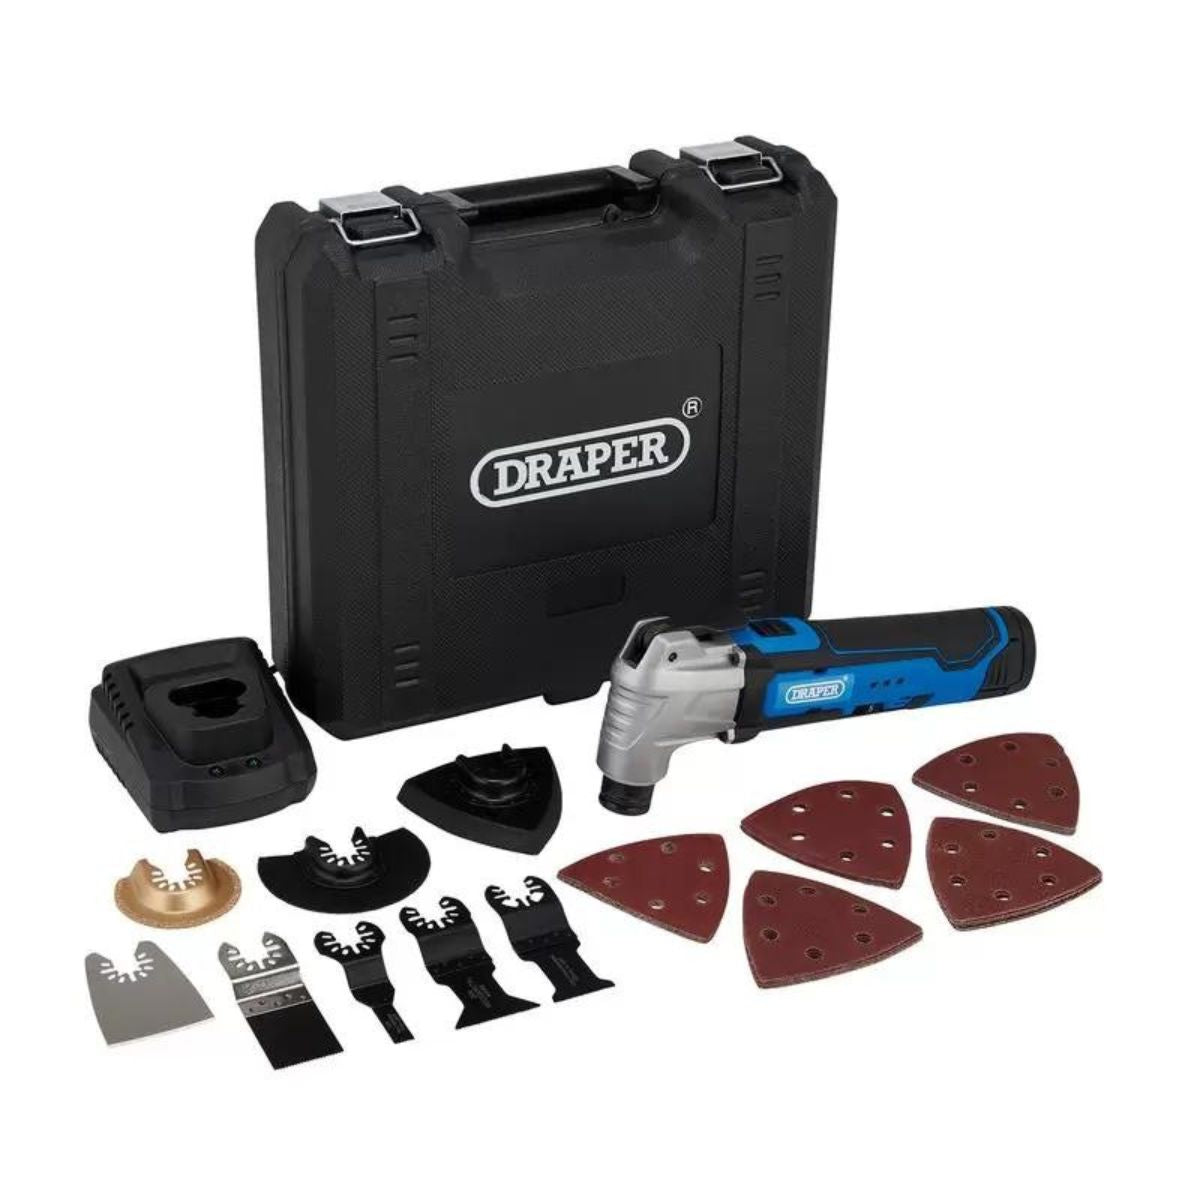 Draper OMT-33-12D 12V Oscillating Multi-Tool 33 Piece 1 x Battery 1.5Ah With Fast Charger 19392